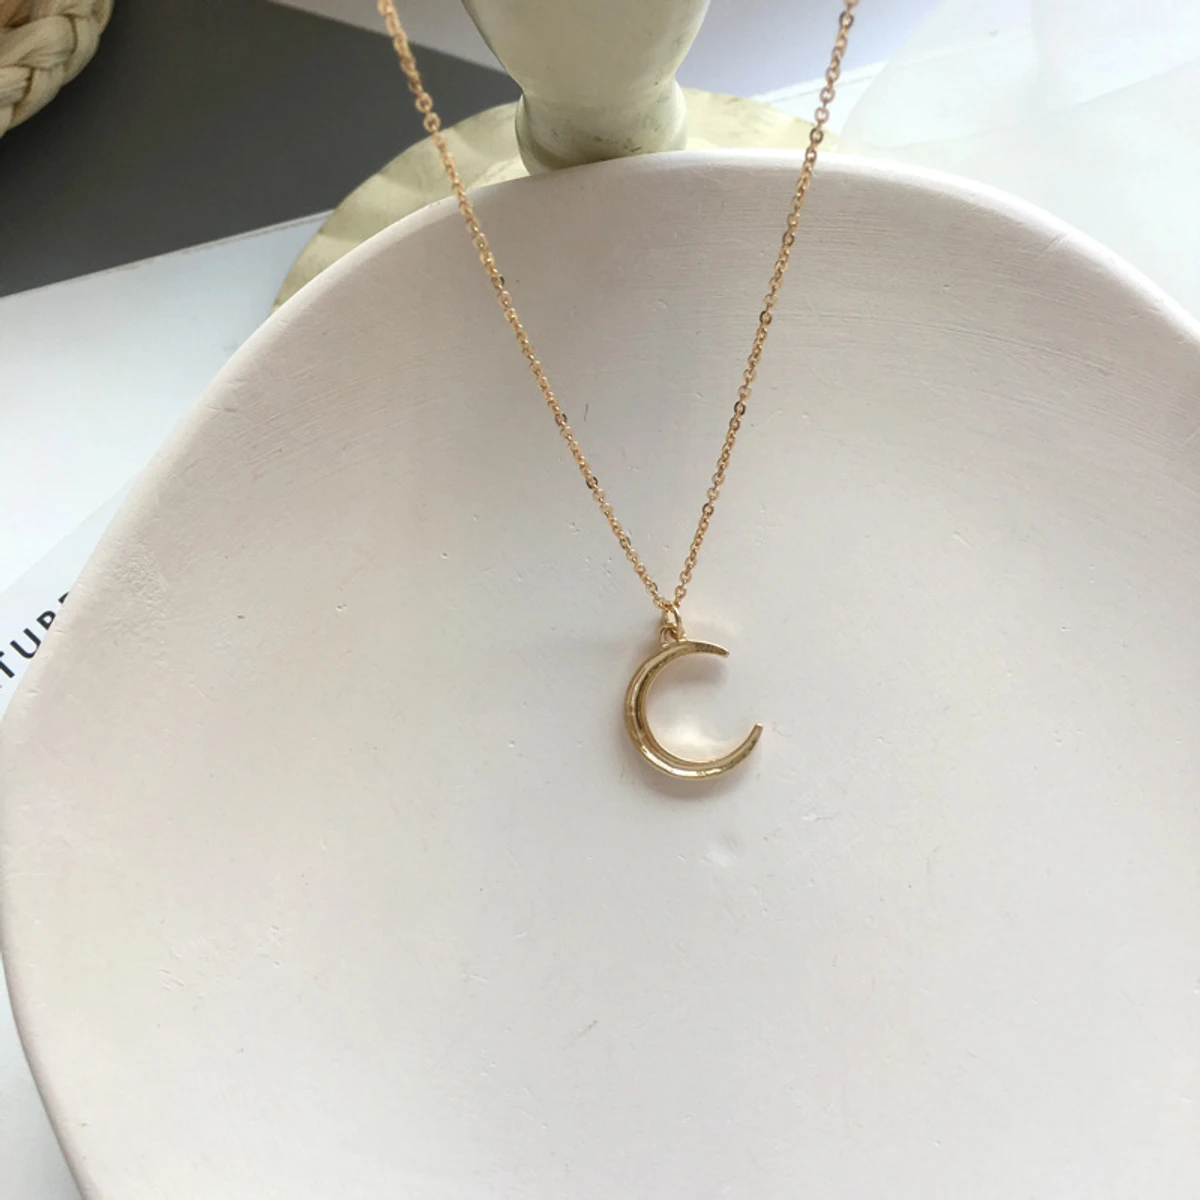 Stylish New Moon Necklace For Girl/Women